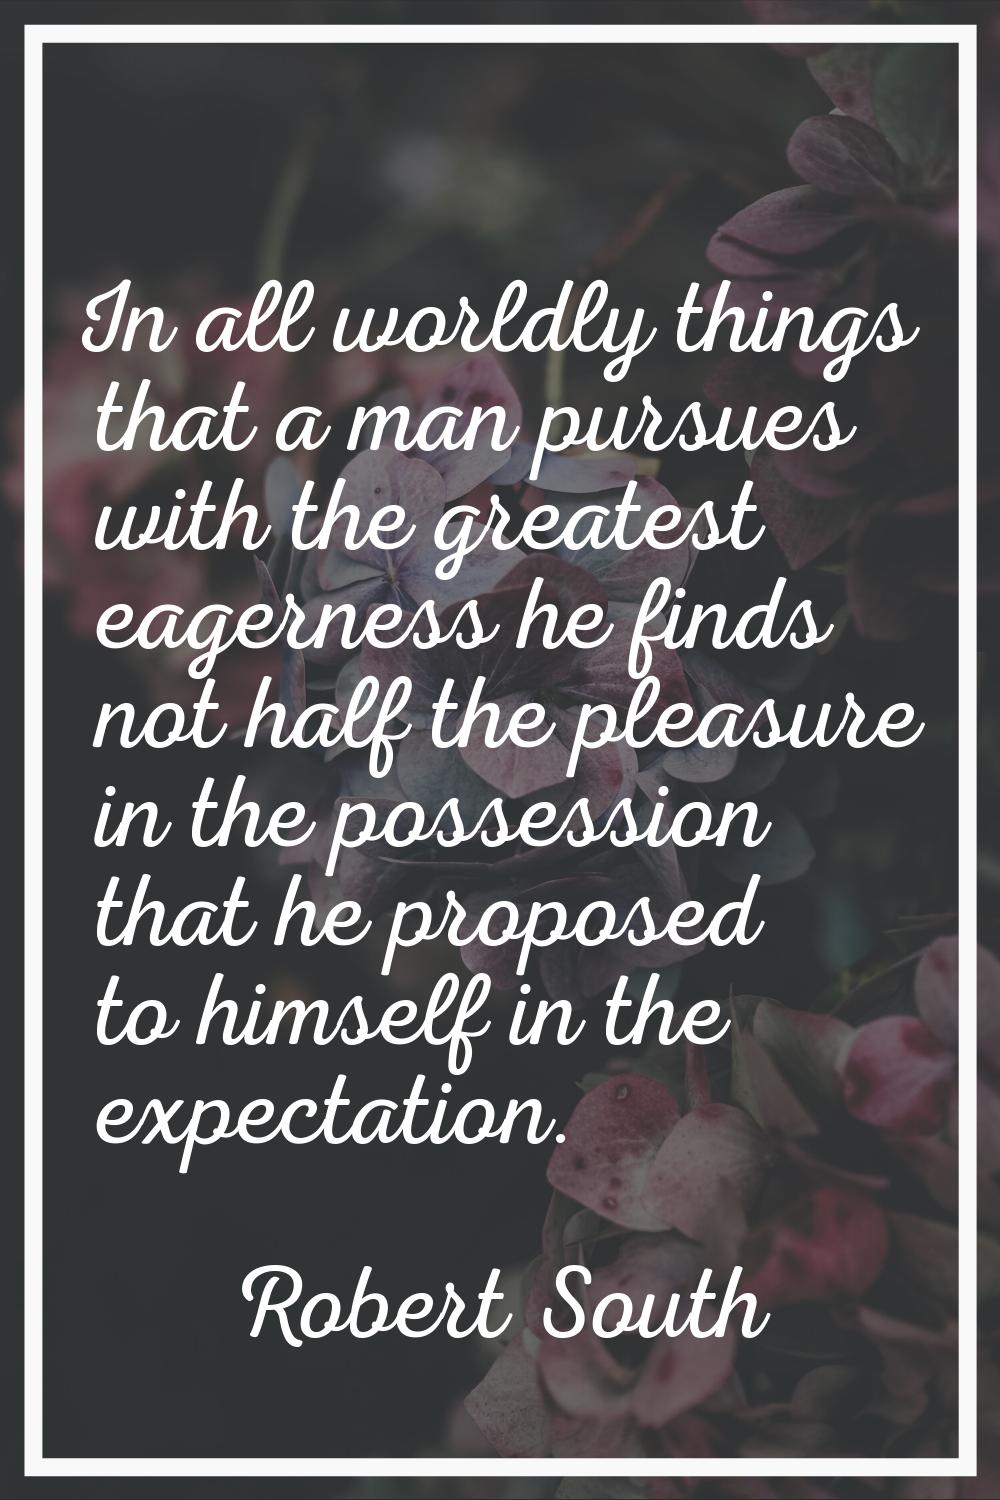 In all worldly things that a man pursues with the greatest eagerness he finds not half the pleasure